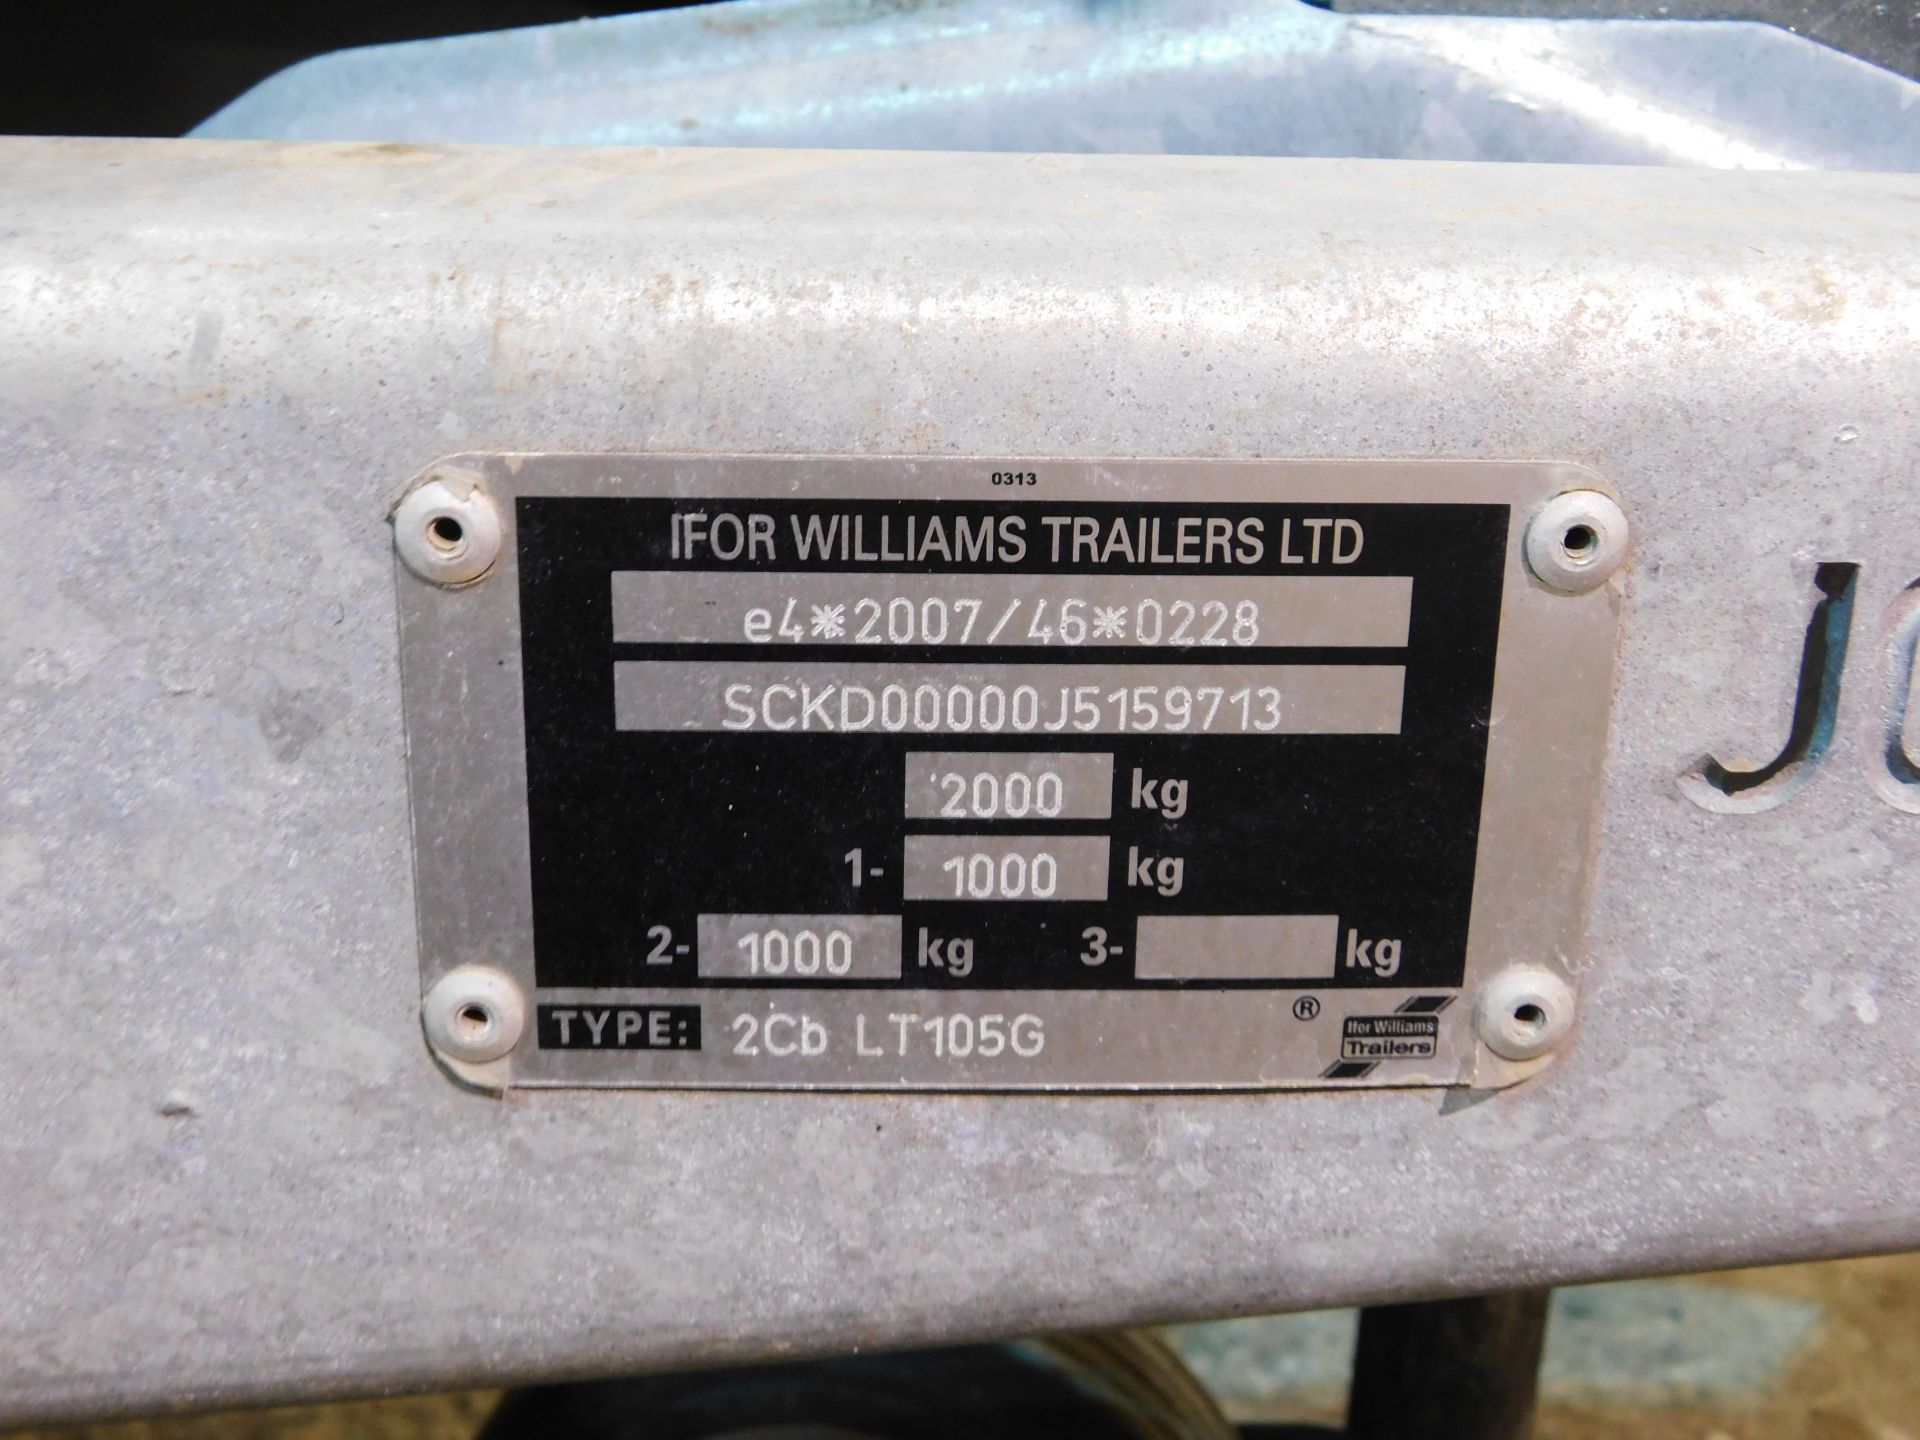 Ifor Williams Type 2Cb LT105G Twin Axle Trailer, Serial Number; 5159713, Manufactured Nov 2018, - Image 6 of 10